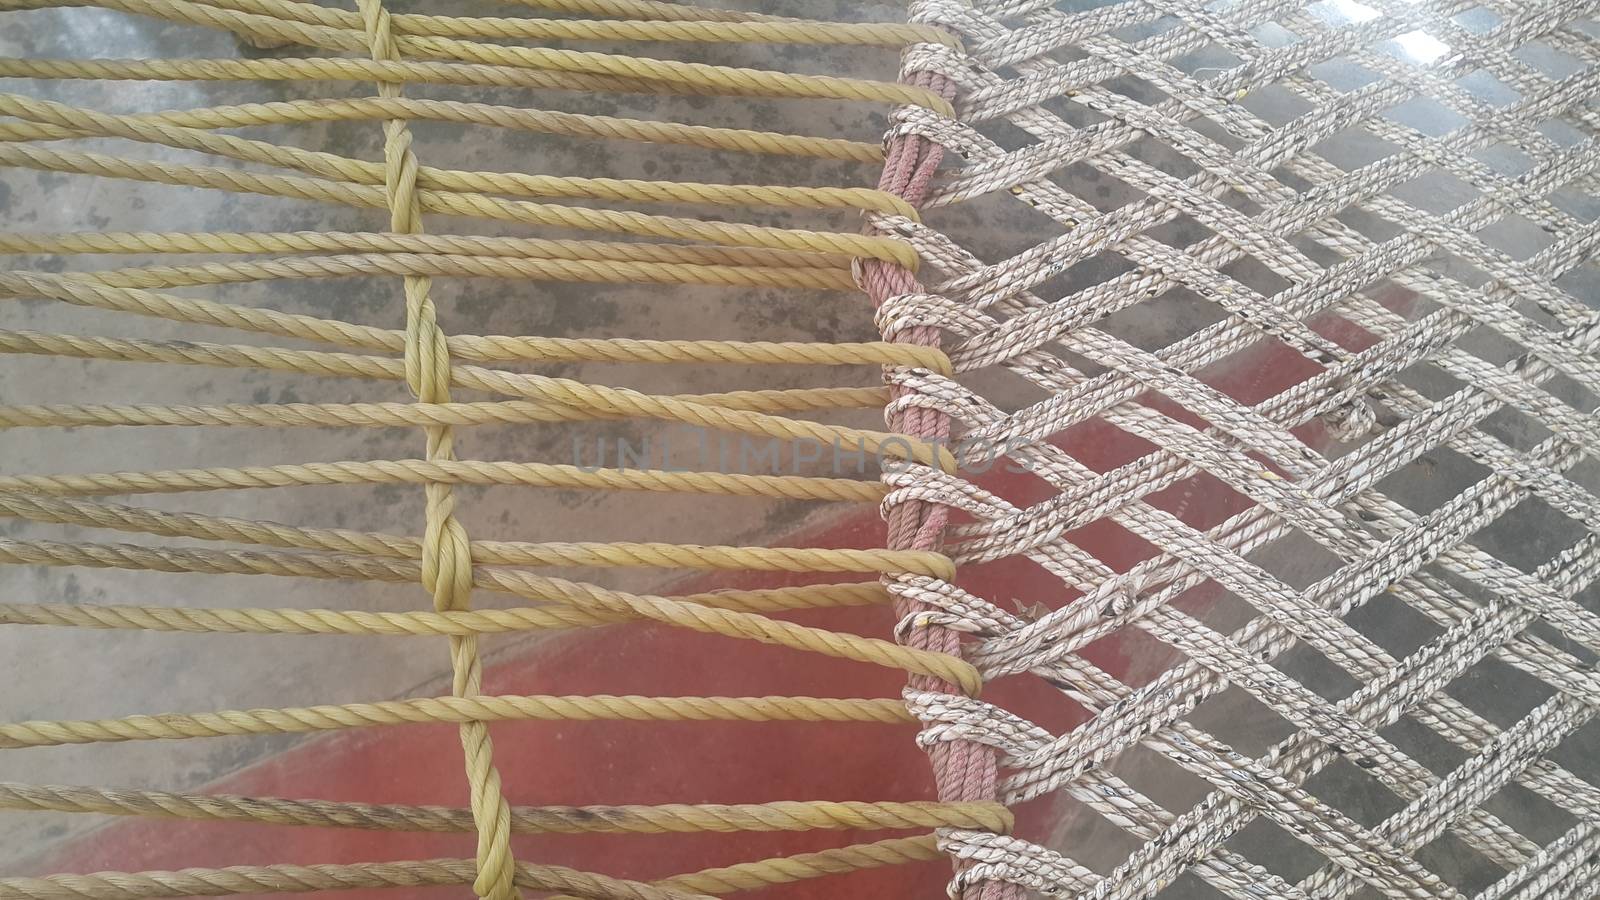 Closeup view of dried jute thread or ropes interwoven for making traditional old style bed called charpai